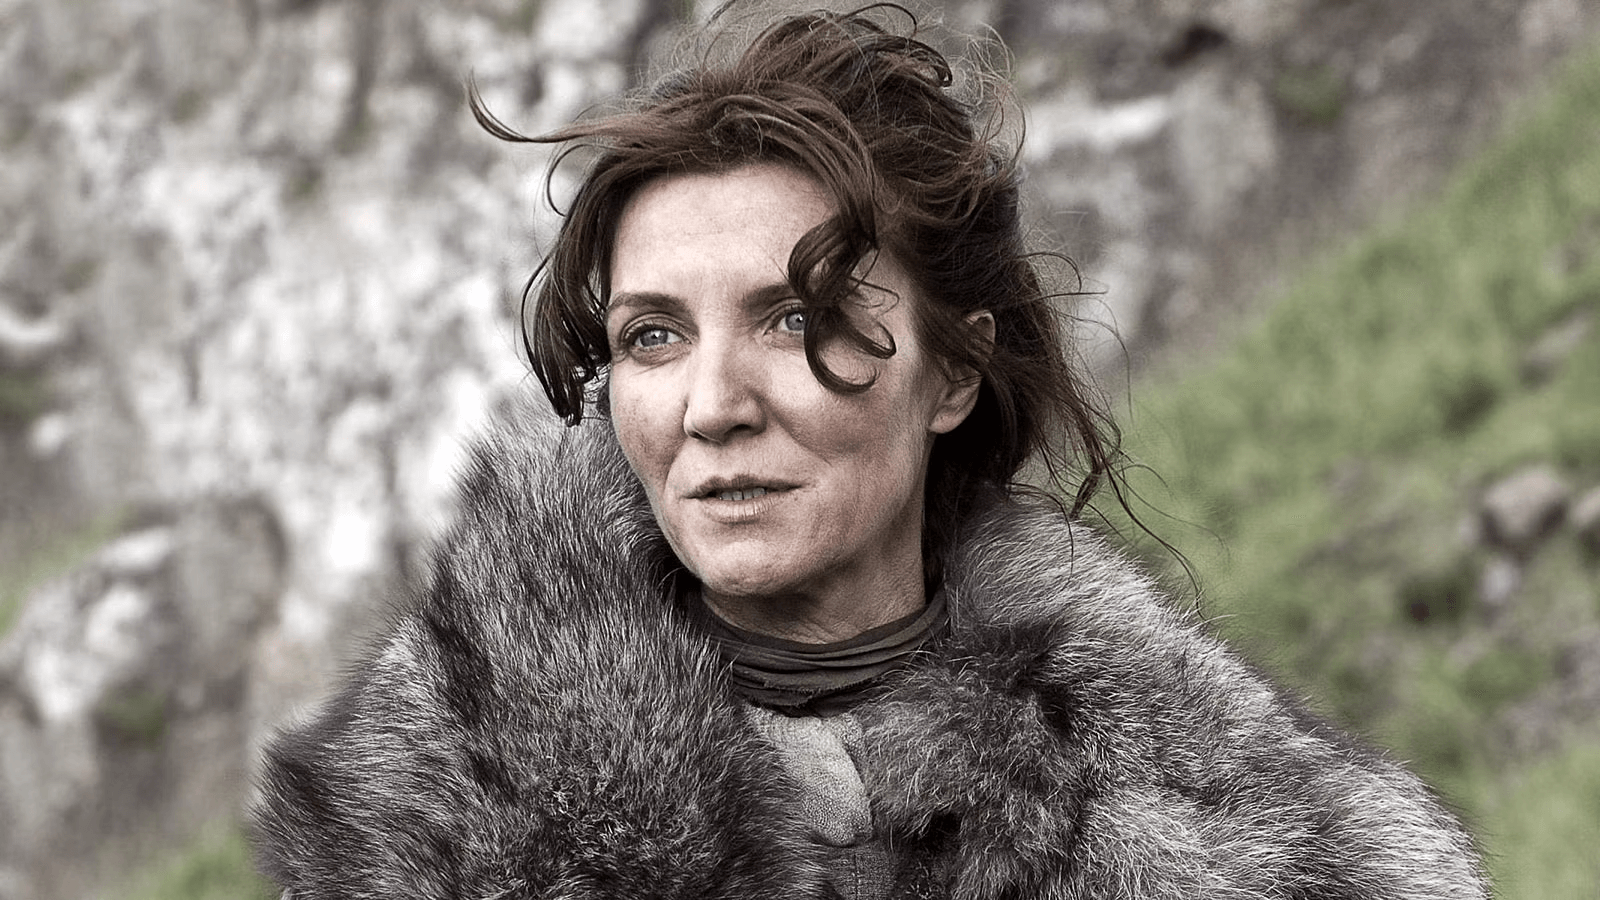 Michelle Fairley as Catelyn Stark in Game of Thrones (HBO)